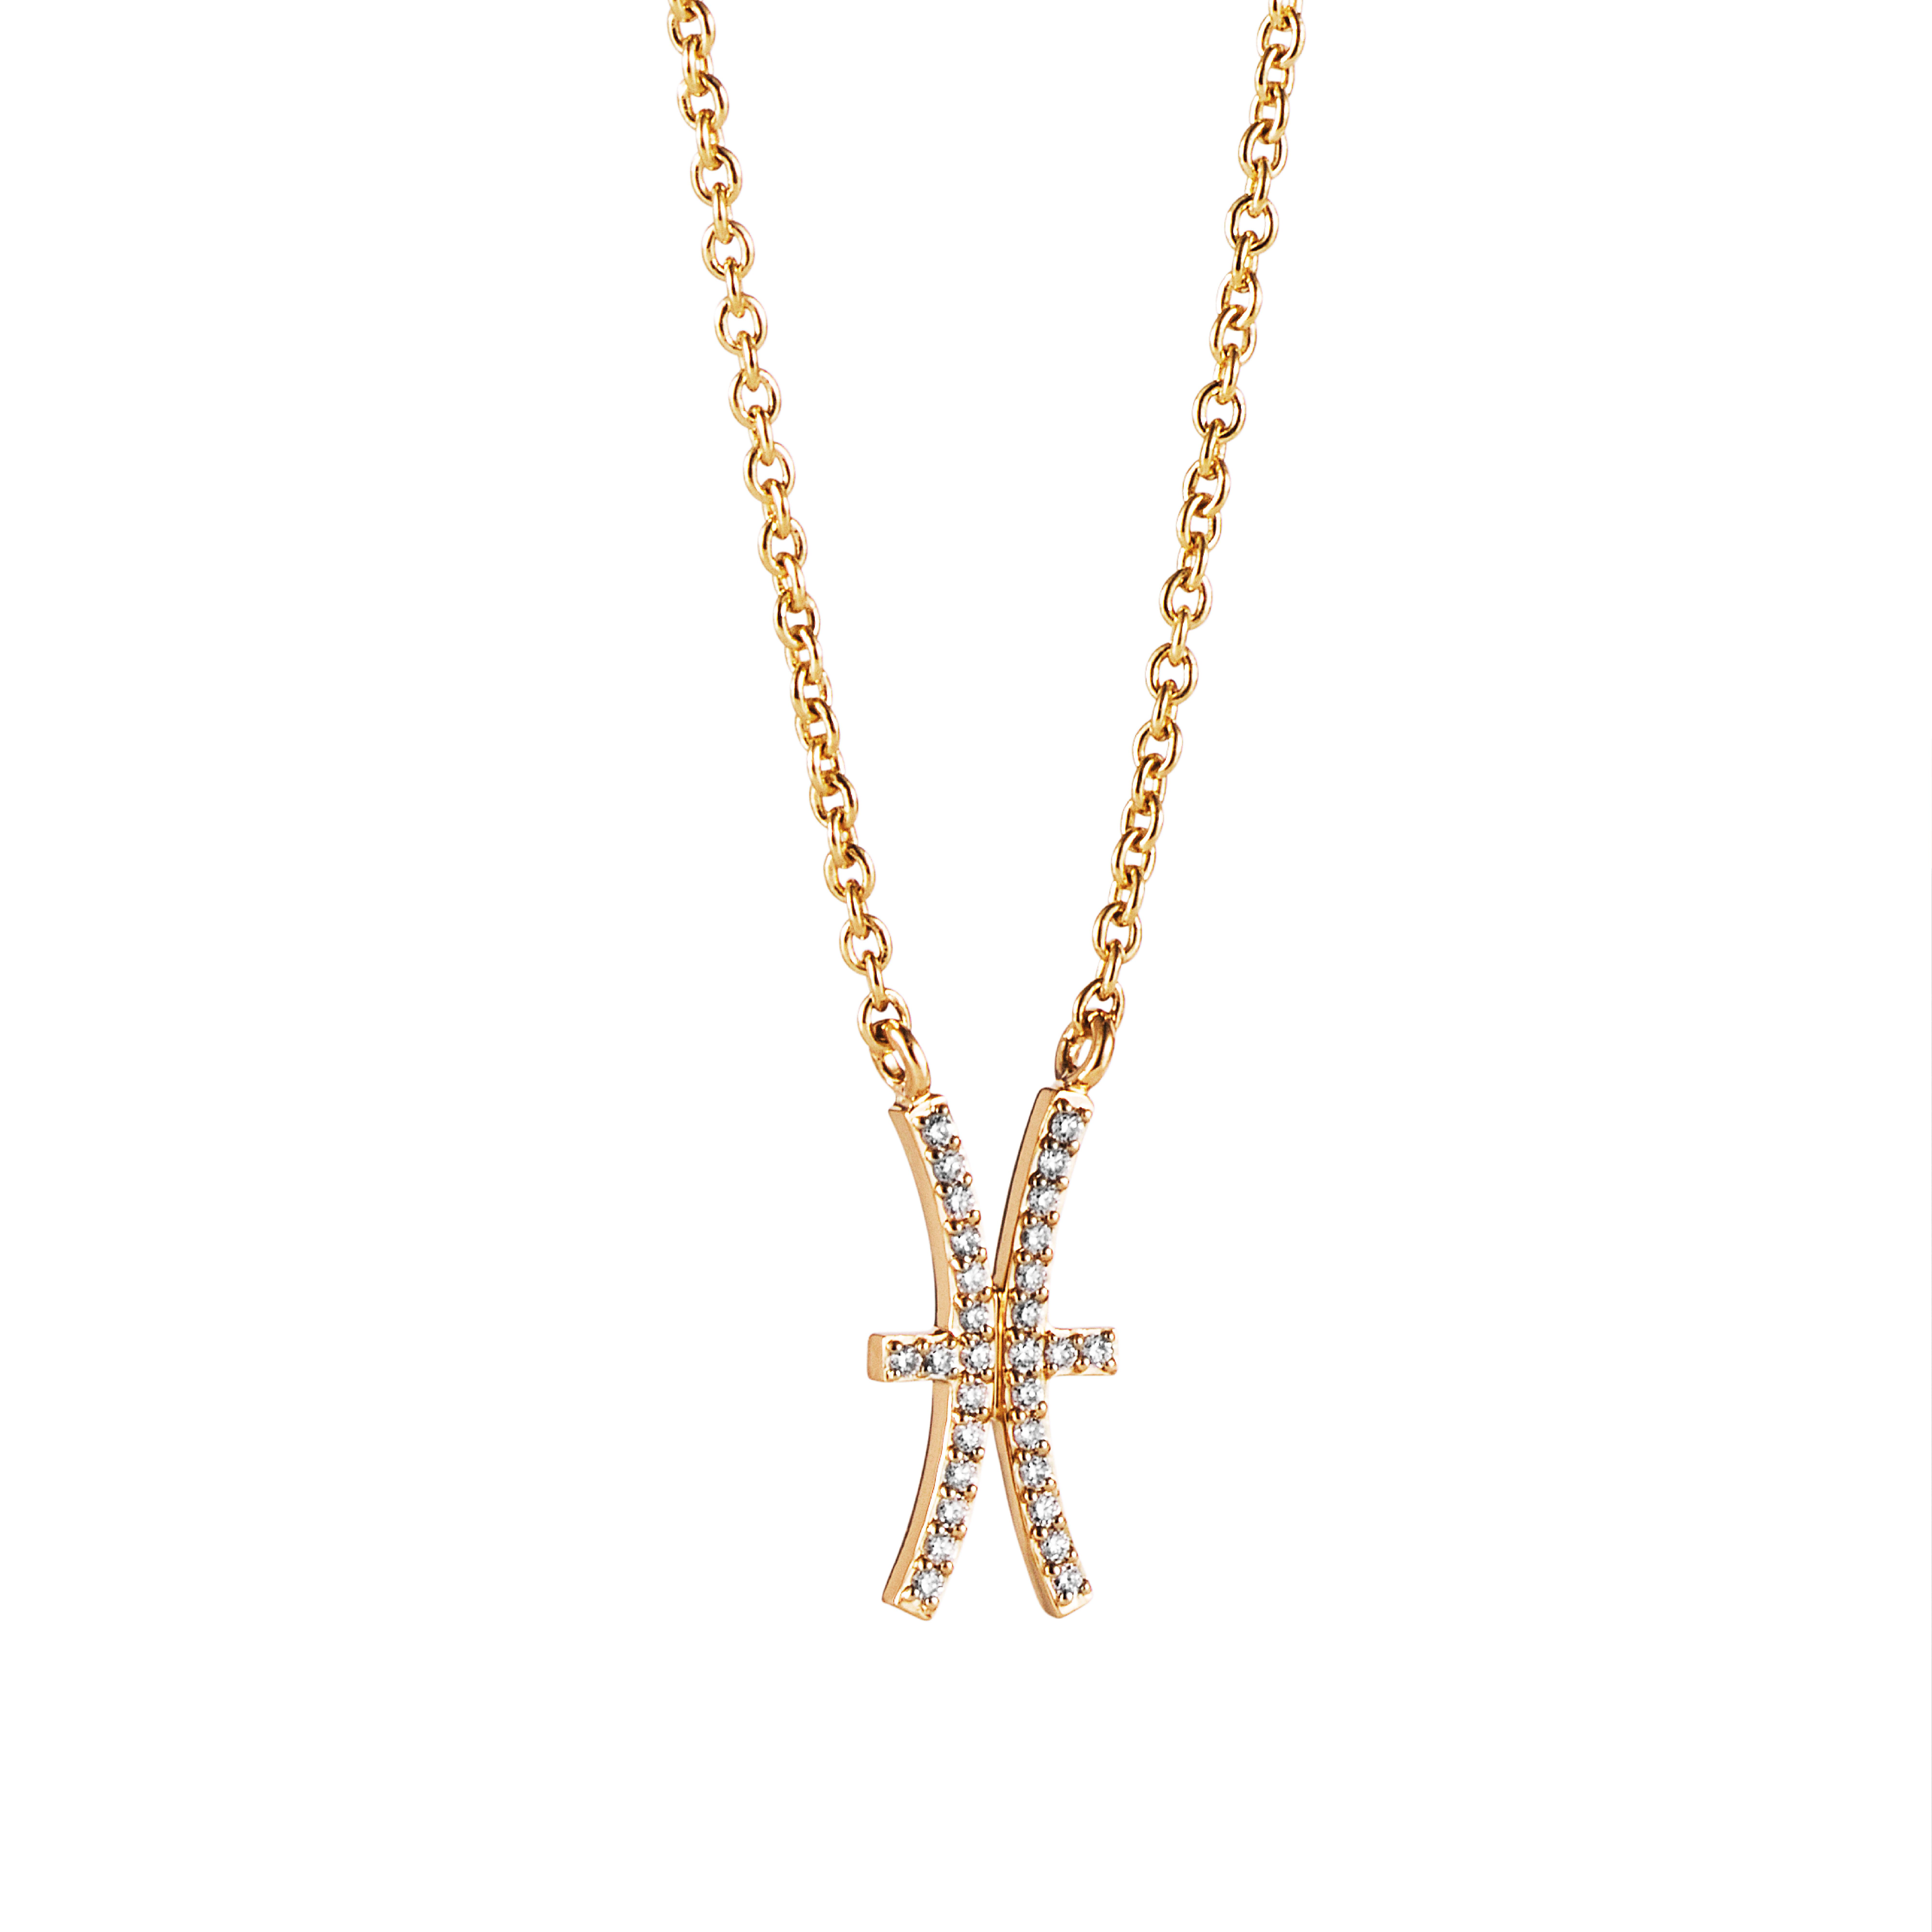 Efva Attling DOUBLE TROUBLE & STARS NECKLACE